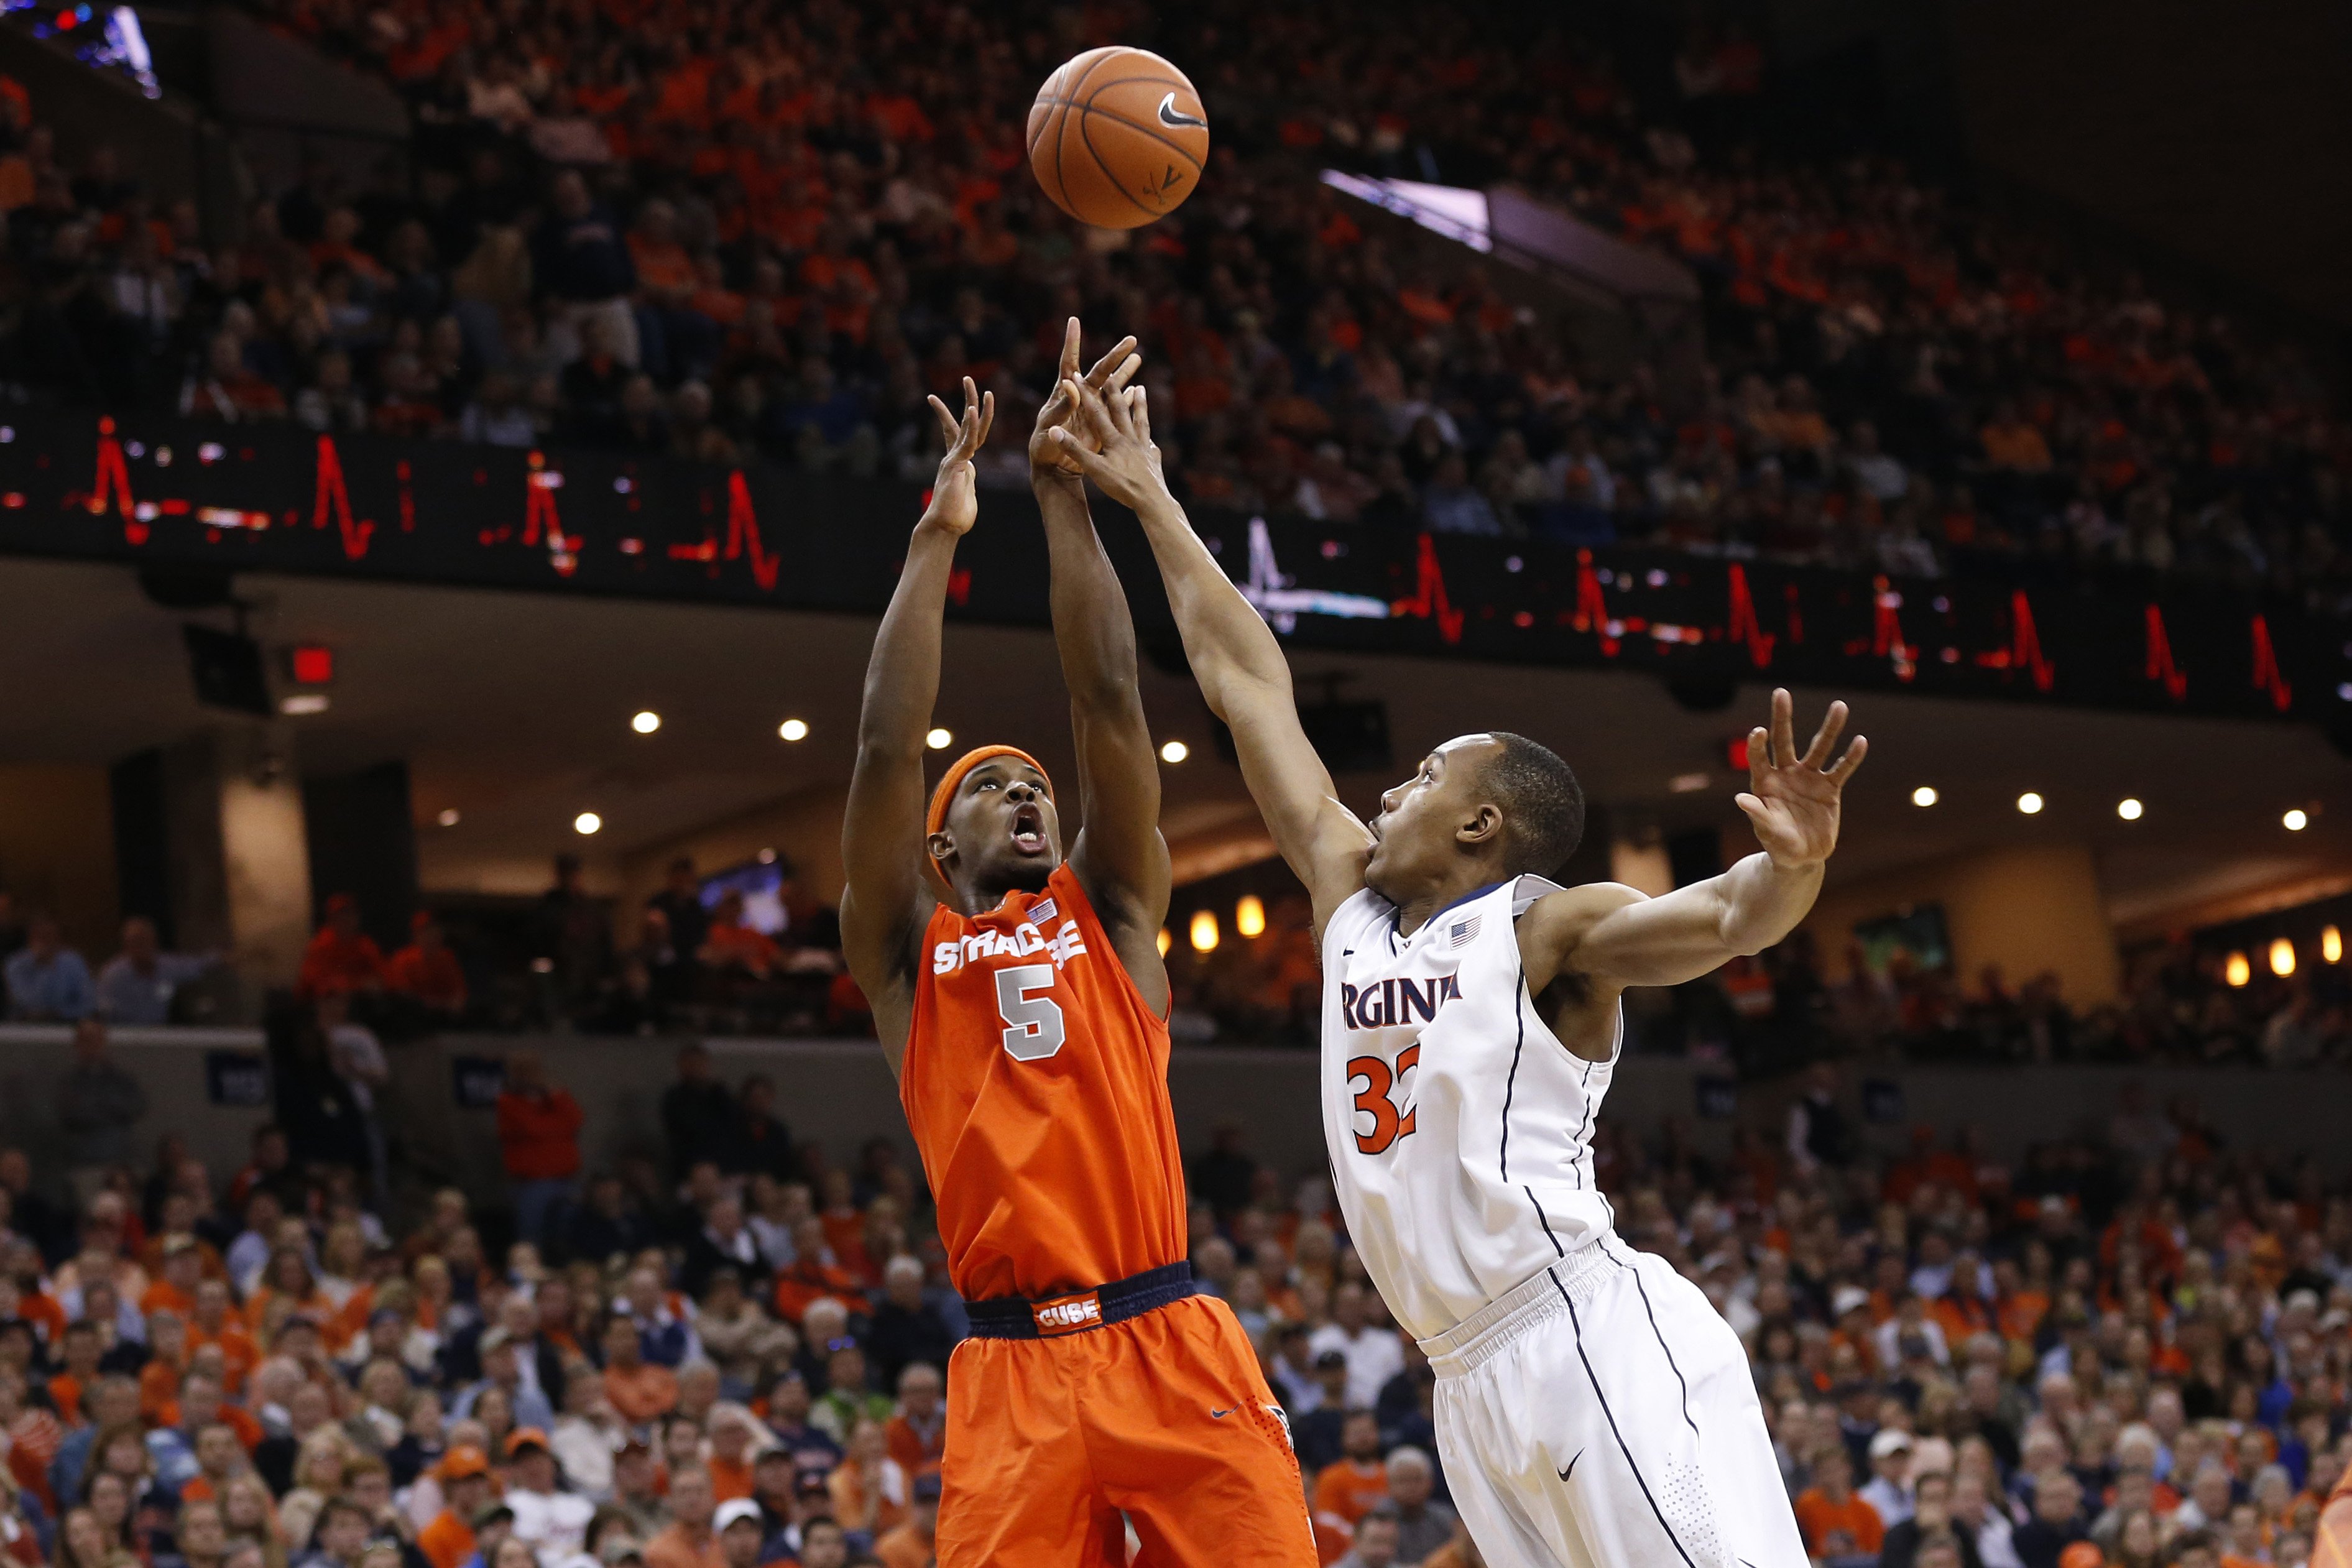 CJ Fair
                              After winning its first 25 games, Syracuse enters the tournament on a cold streak. Any hope the Orange has of righting ship during the tournament will depend on Fair, a 6' 8  senior who anchors the team's front court and was named a second-team All-American.